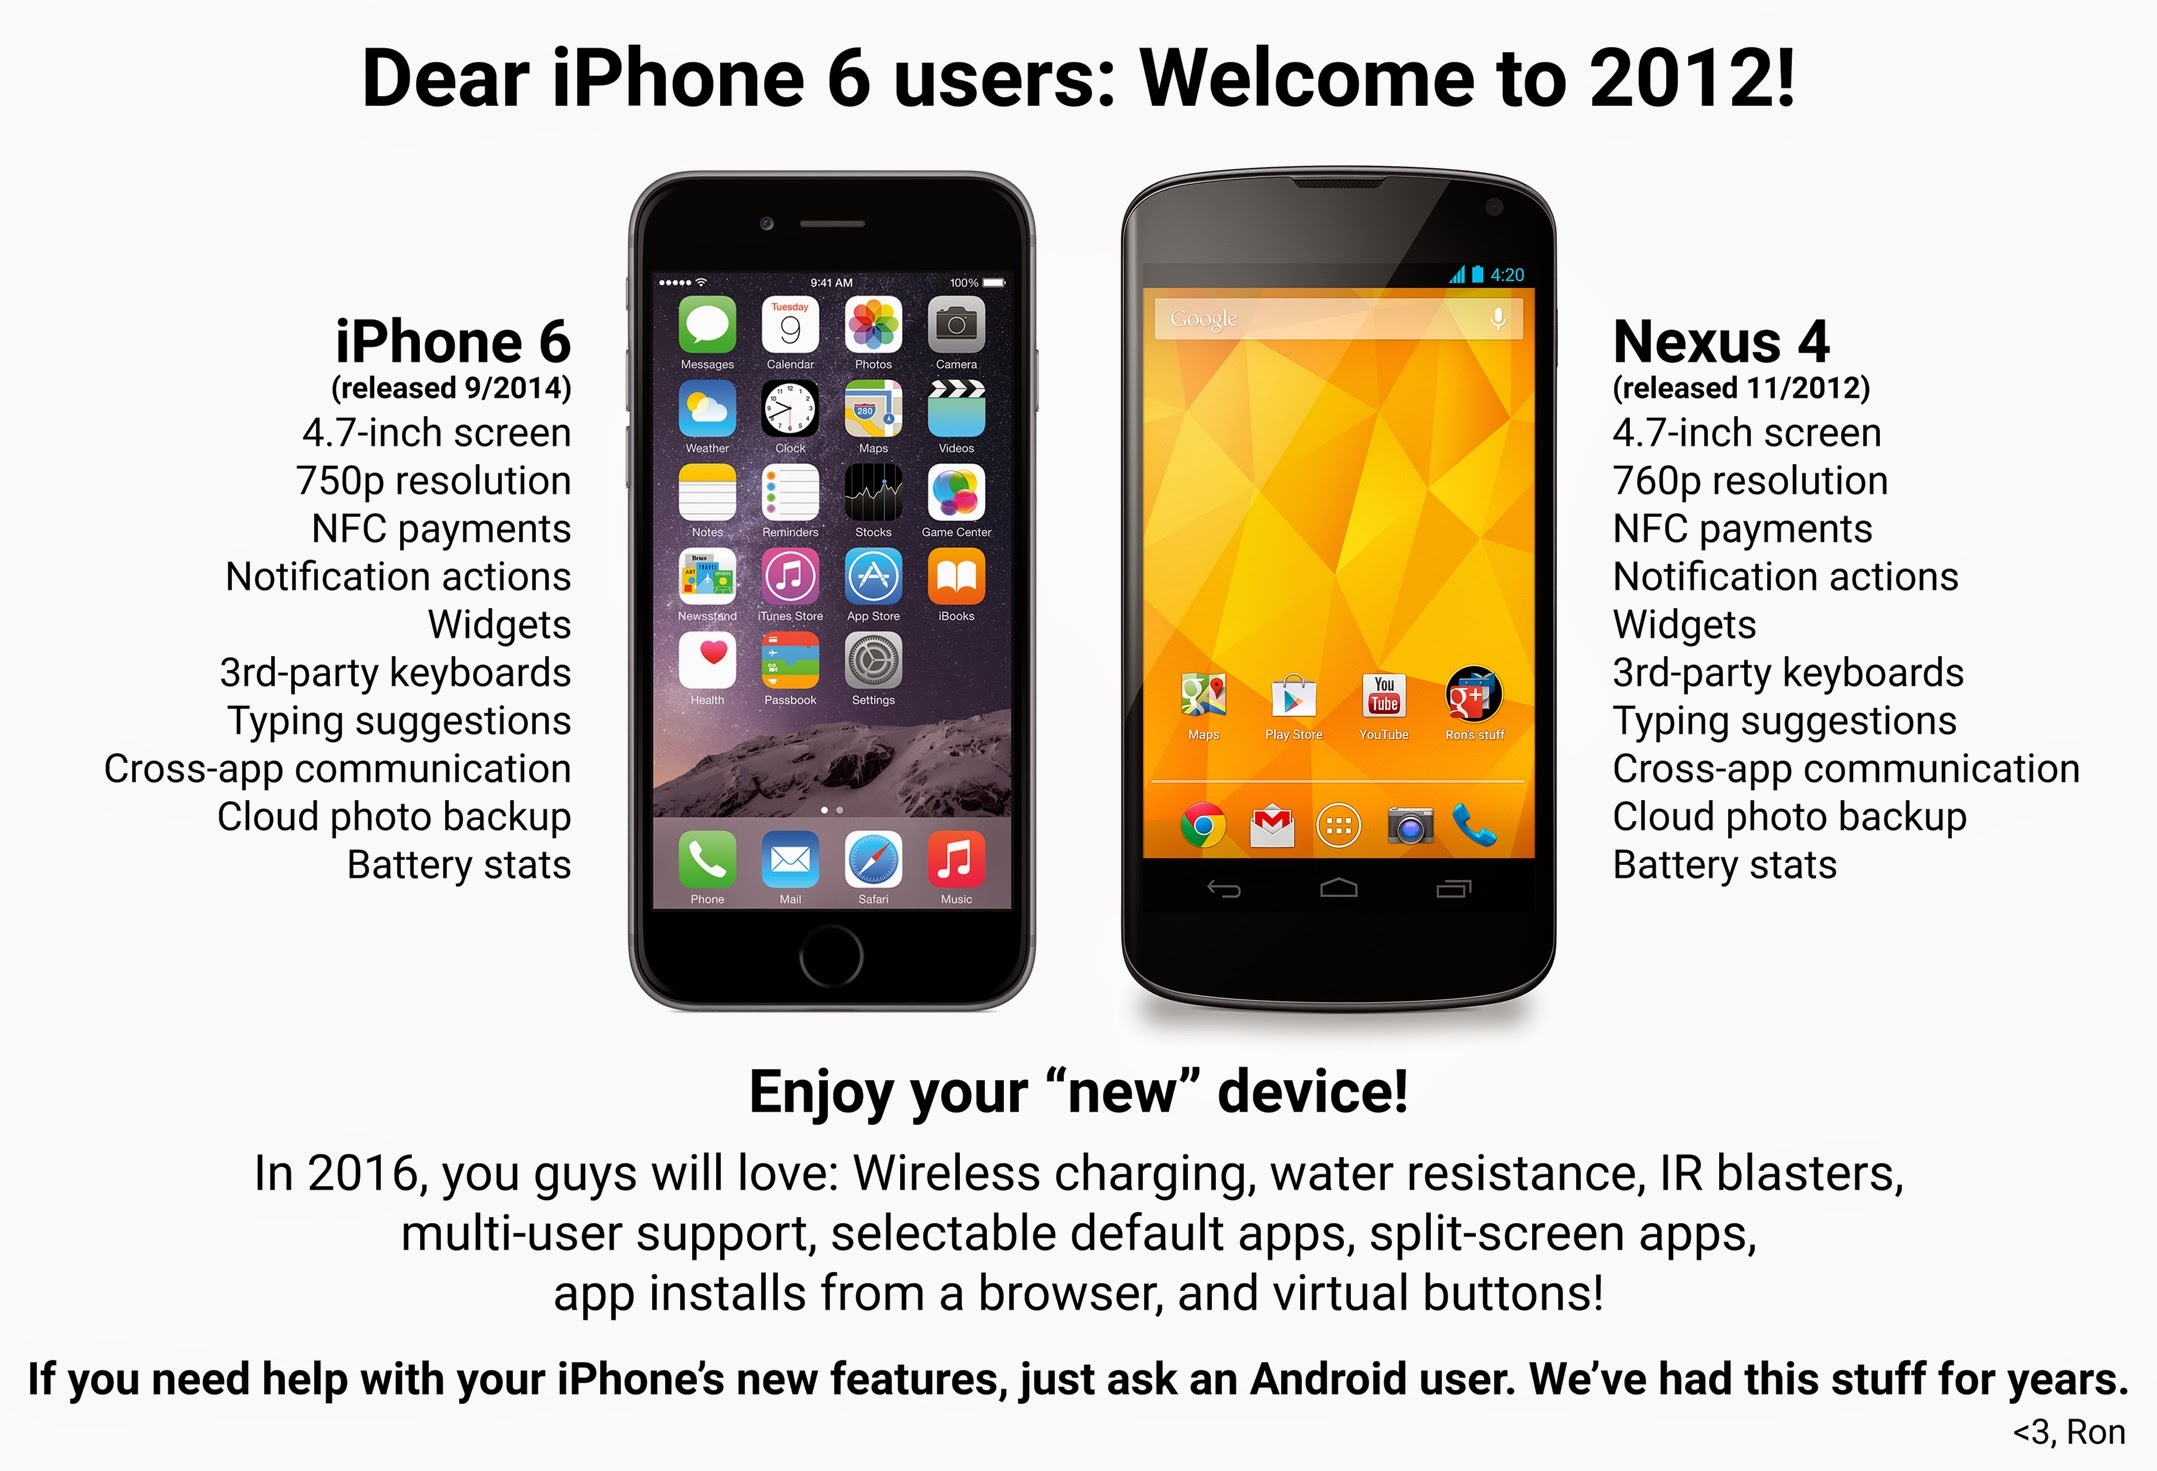 Welcome to 2012, iPhone users